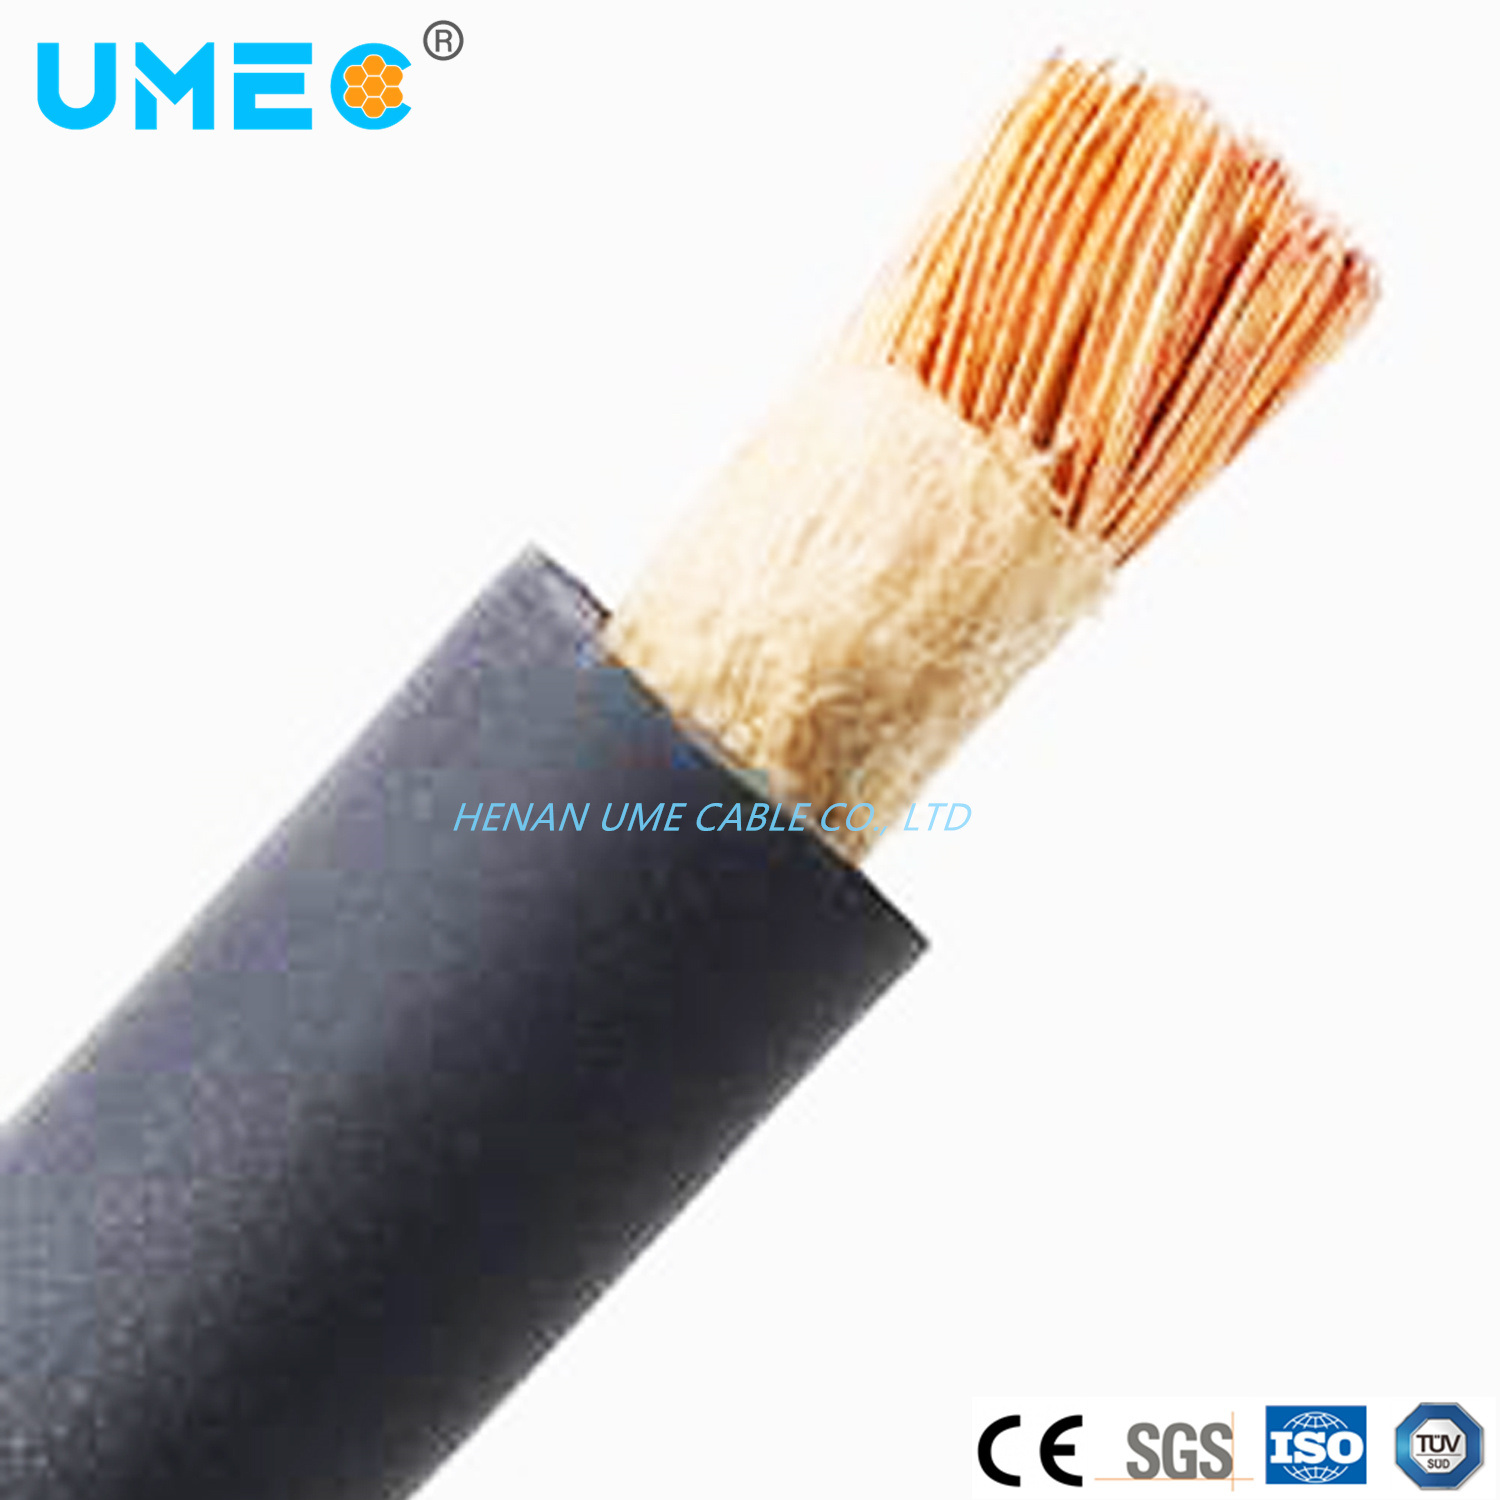 China Heavy Duty Rubber Welding Cable 1/0 2/0 3/0 4/0 AWG Soft Copper Wires Electric Welding Cable